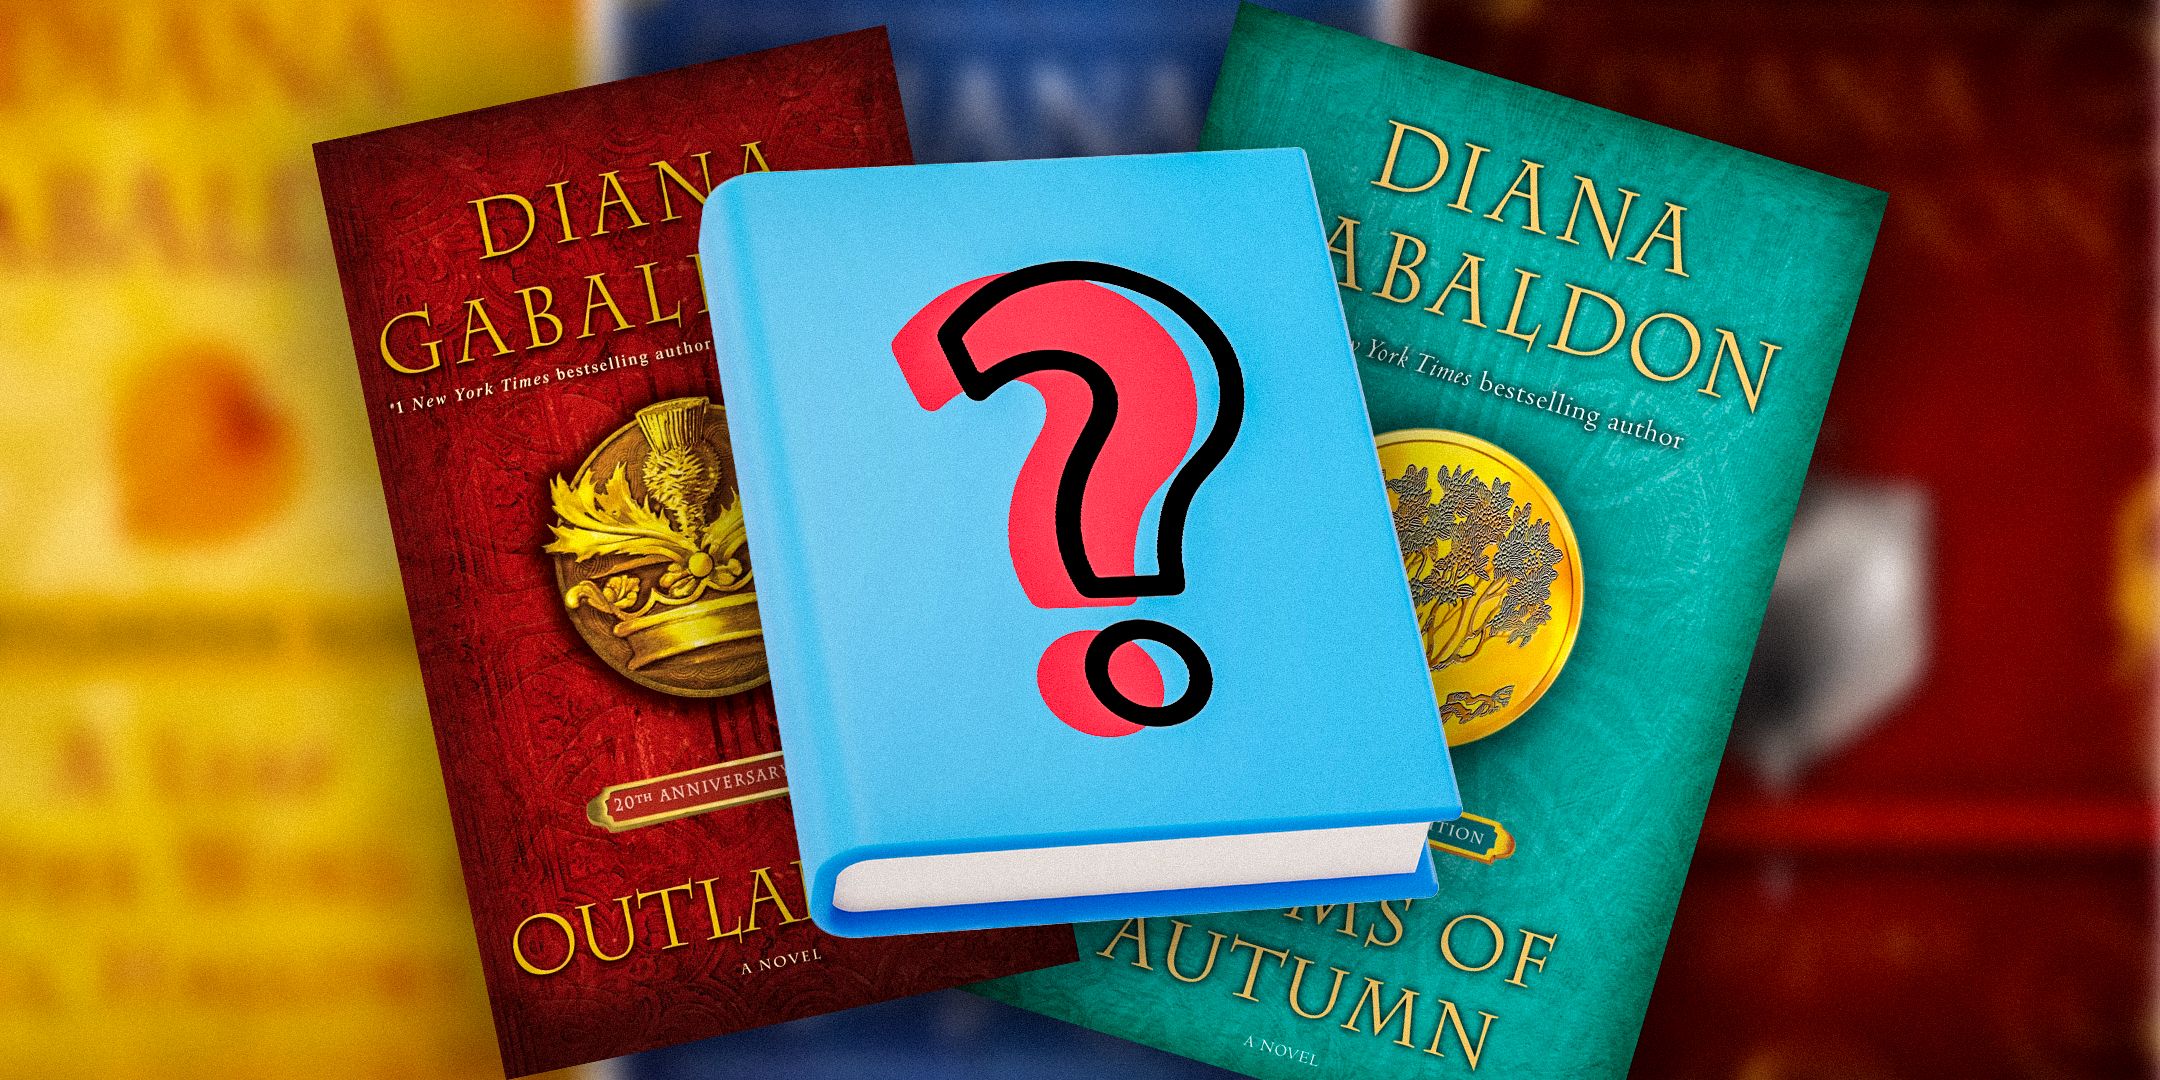 A book with a question mark in front of two Diana Gabaldon's Outlander and Drums of Autumn covers